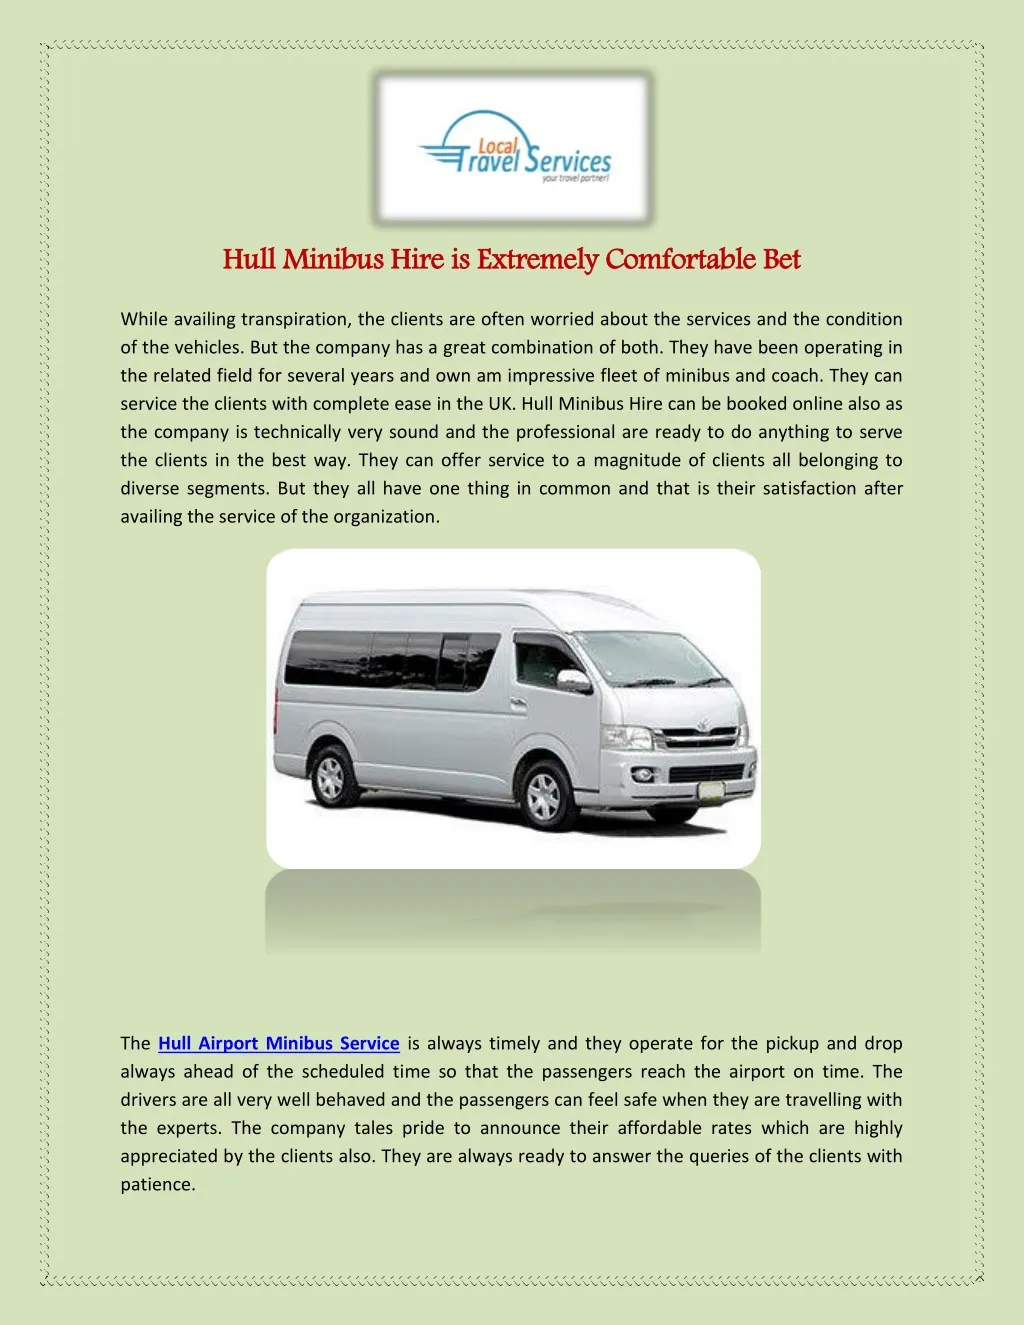 hull minibus hire is extremely comfortable bet